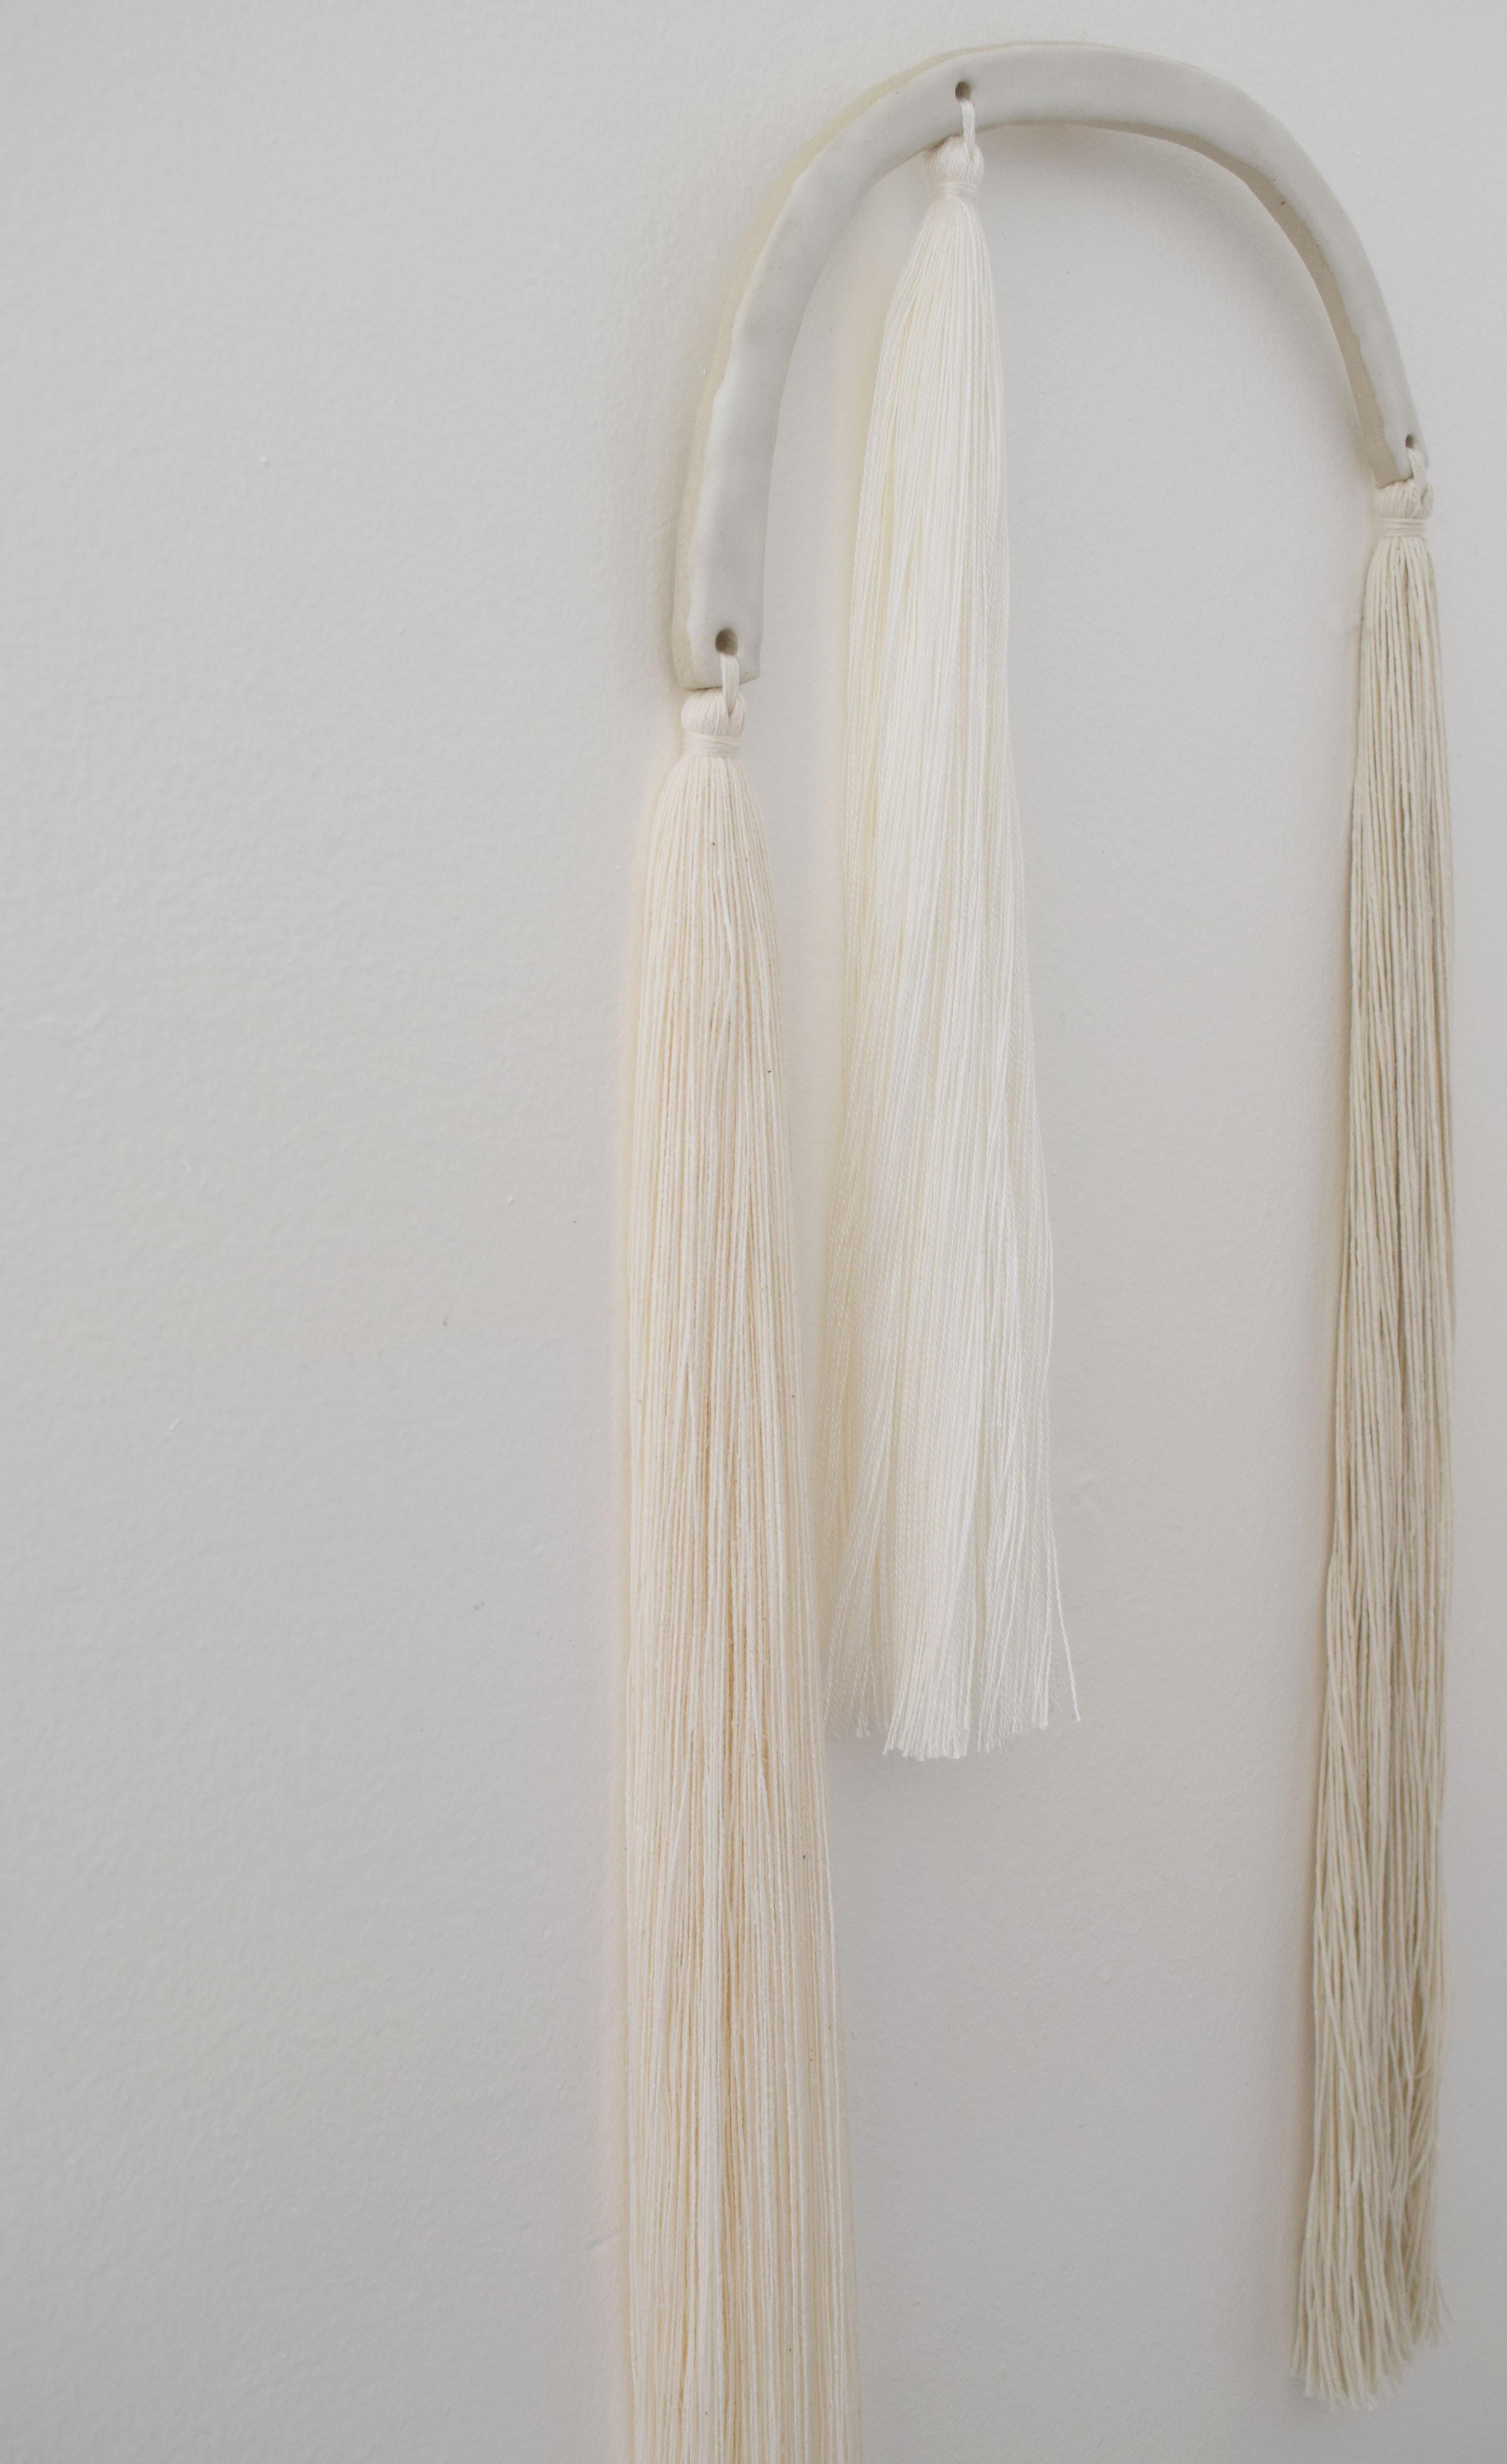 Wall sculpture #679 by Karen Gayle Tinney

Mixed material wall sculpture comprised of a ceramic panel with applied cotton and tencel fringe. The ceramic piece is hand formed out of stoneware and is glazed white. Fringe has been hand applied and